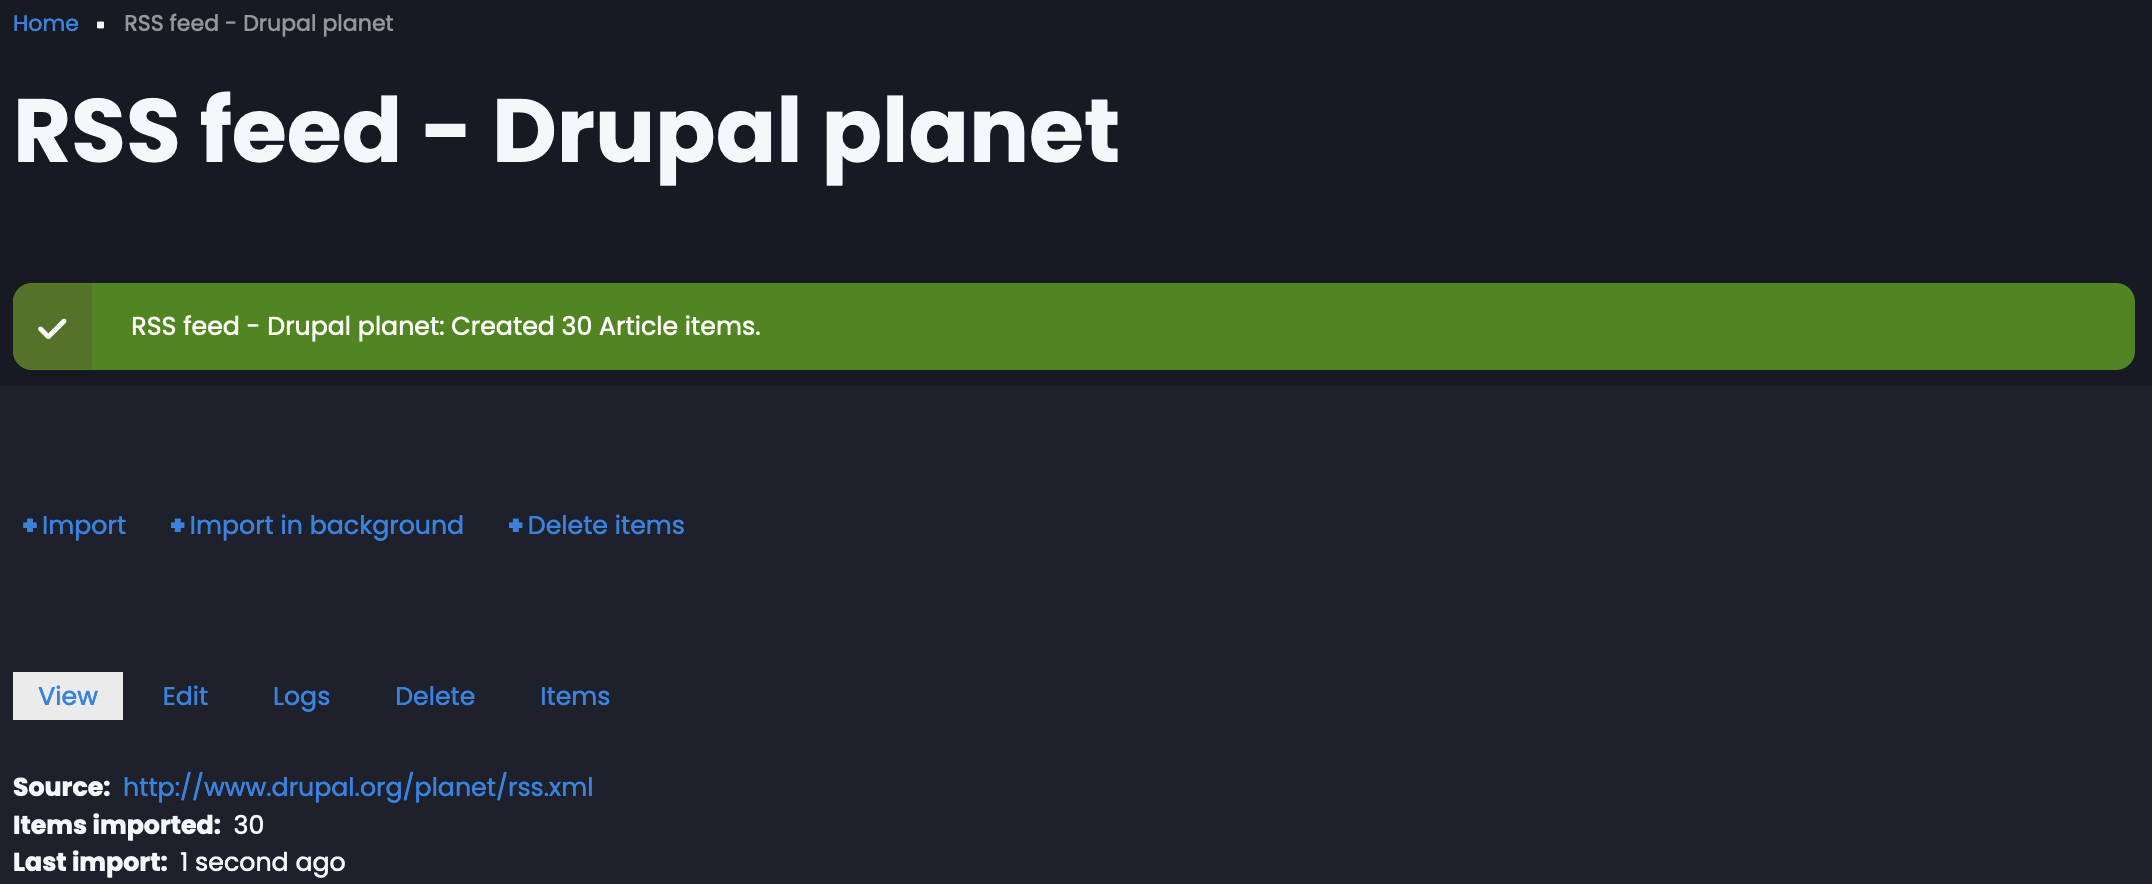 Drupal feed import confirmation screen